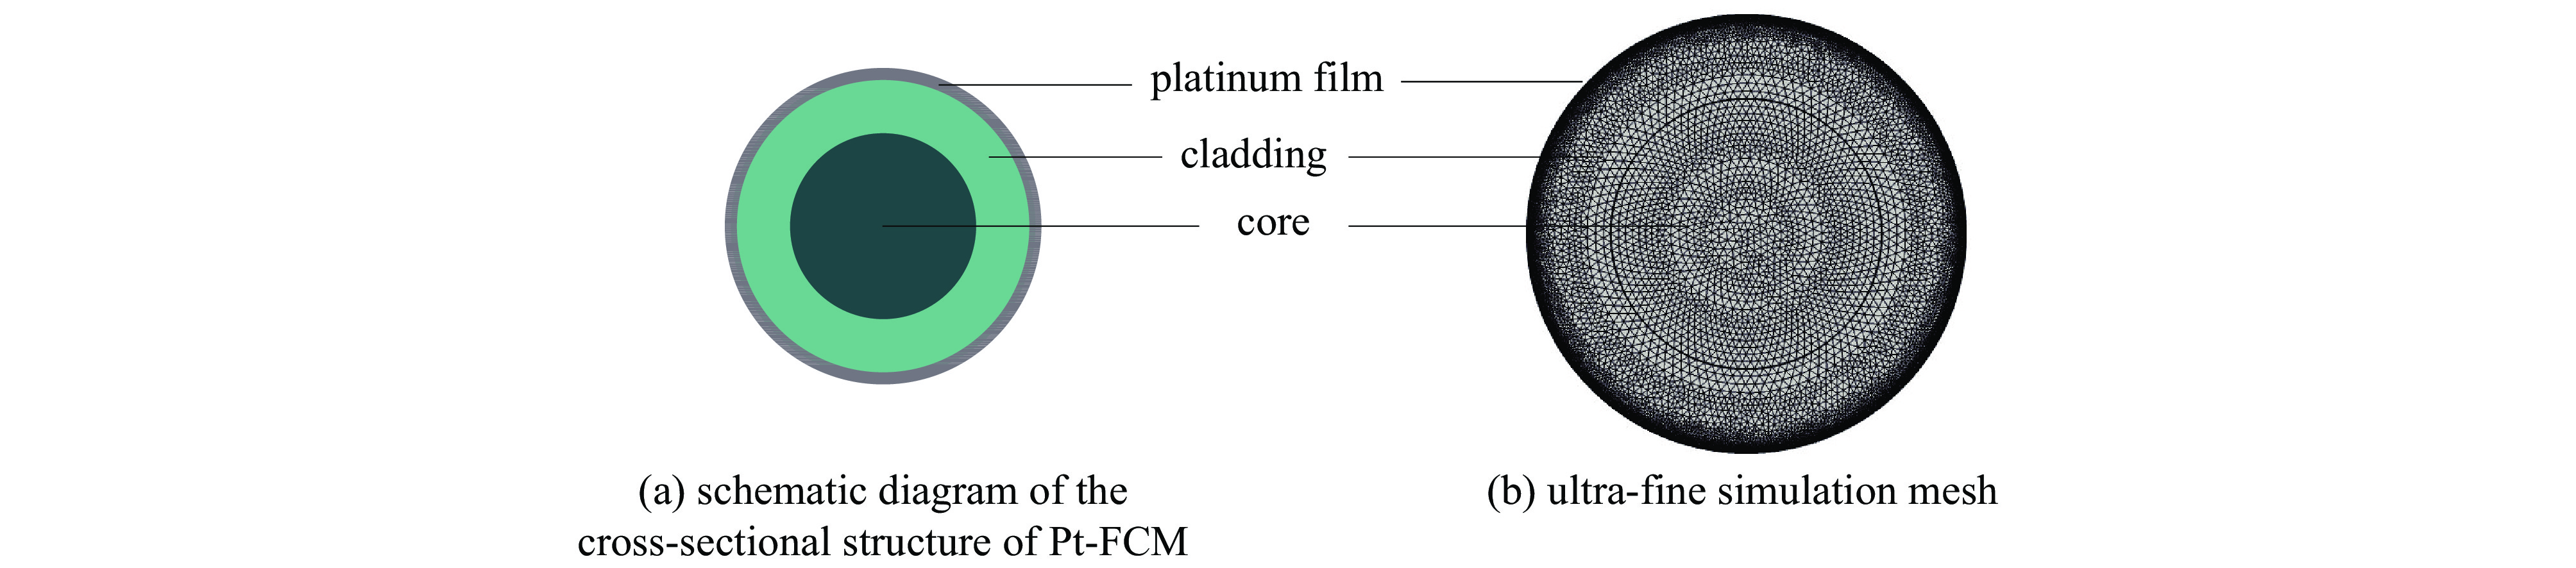 Schematic diagram of the cross-sectional structure of Pt-FCM and ultra-fine simulation mesh